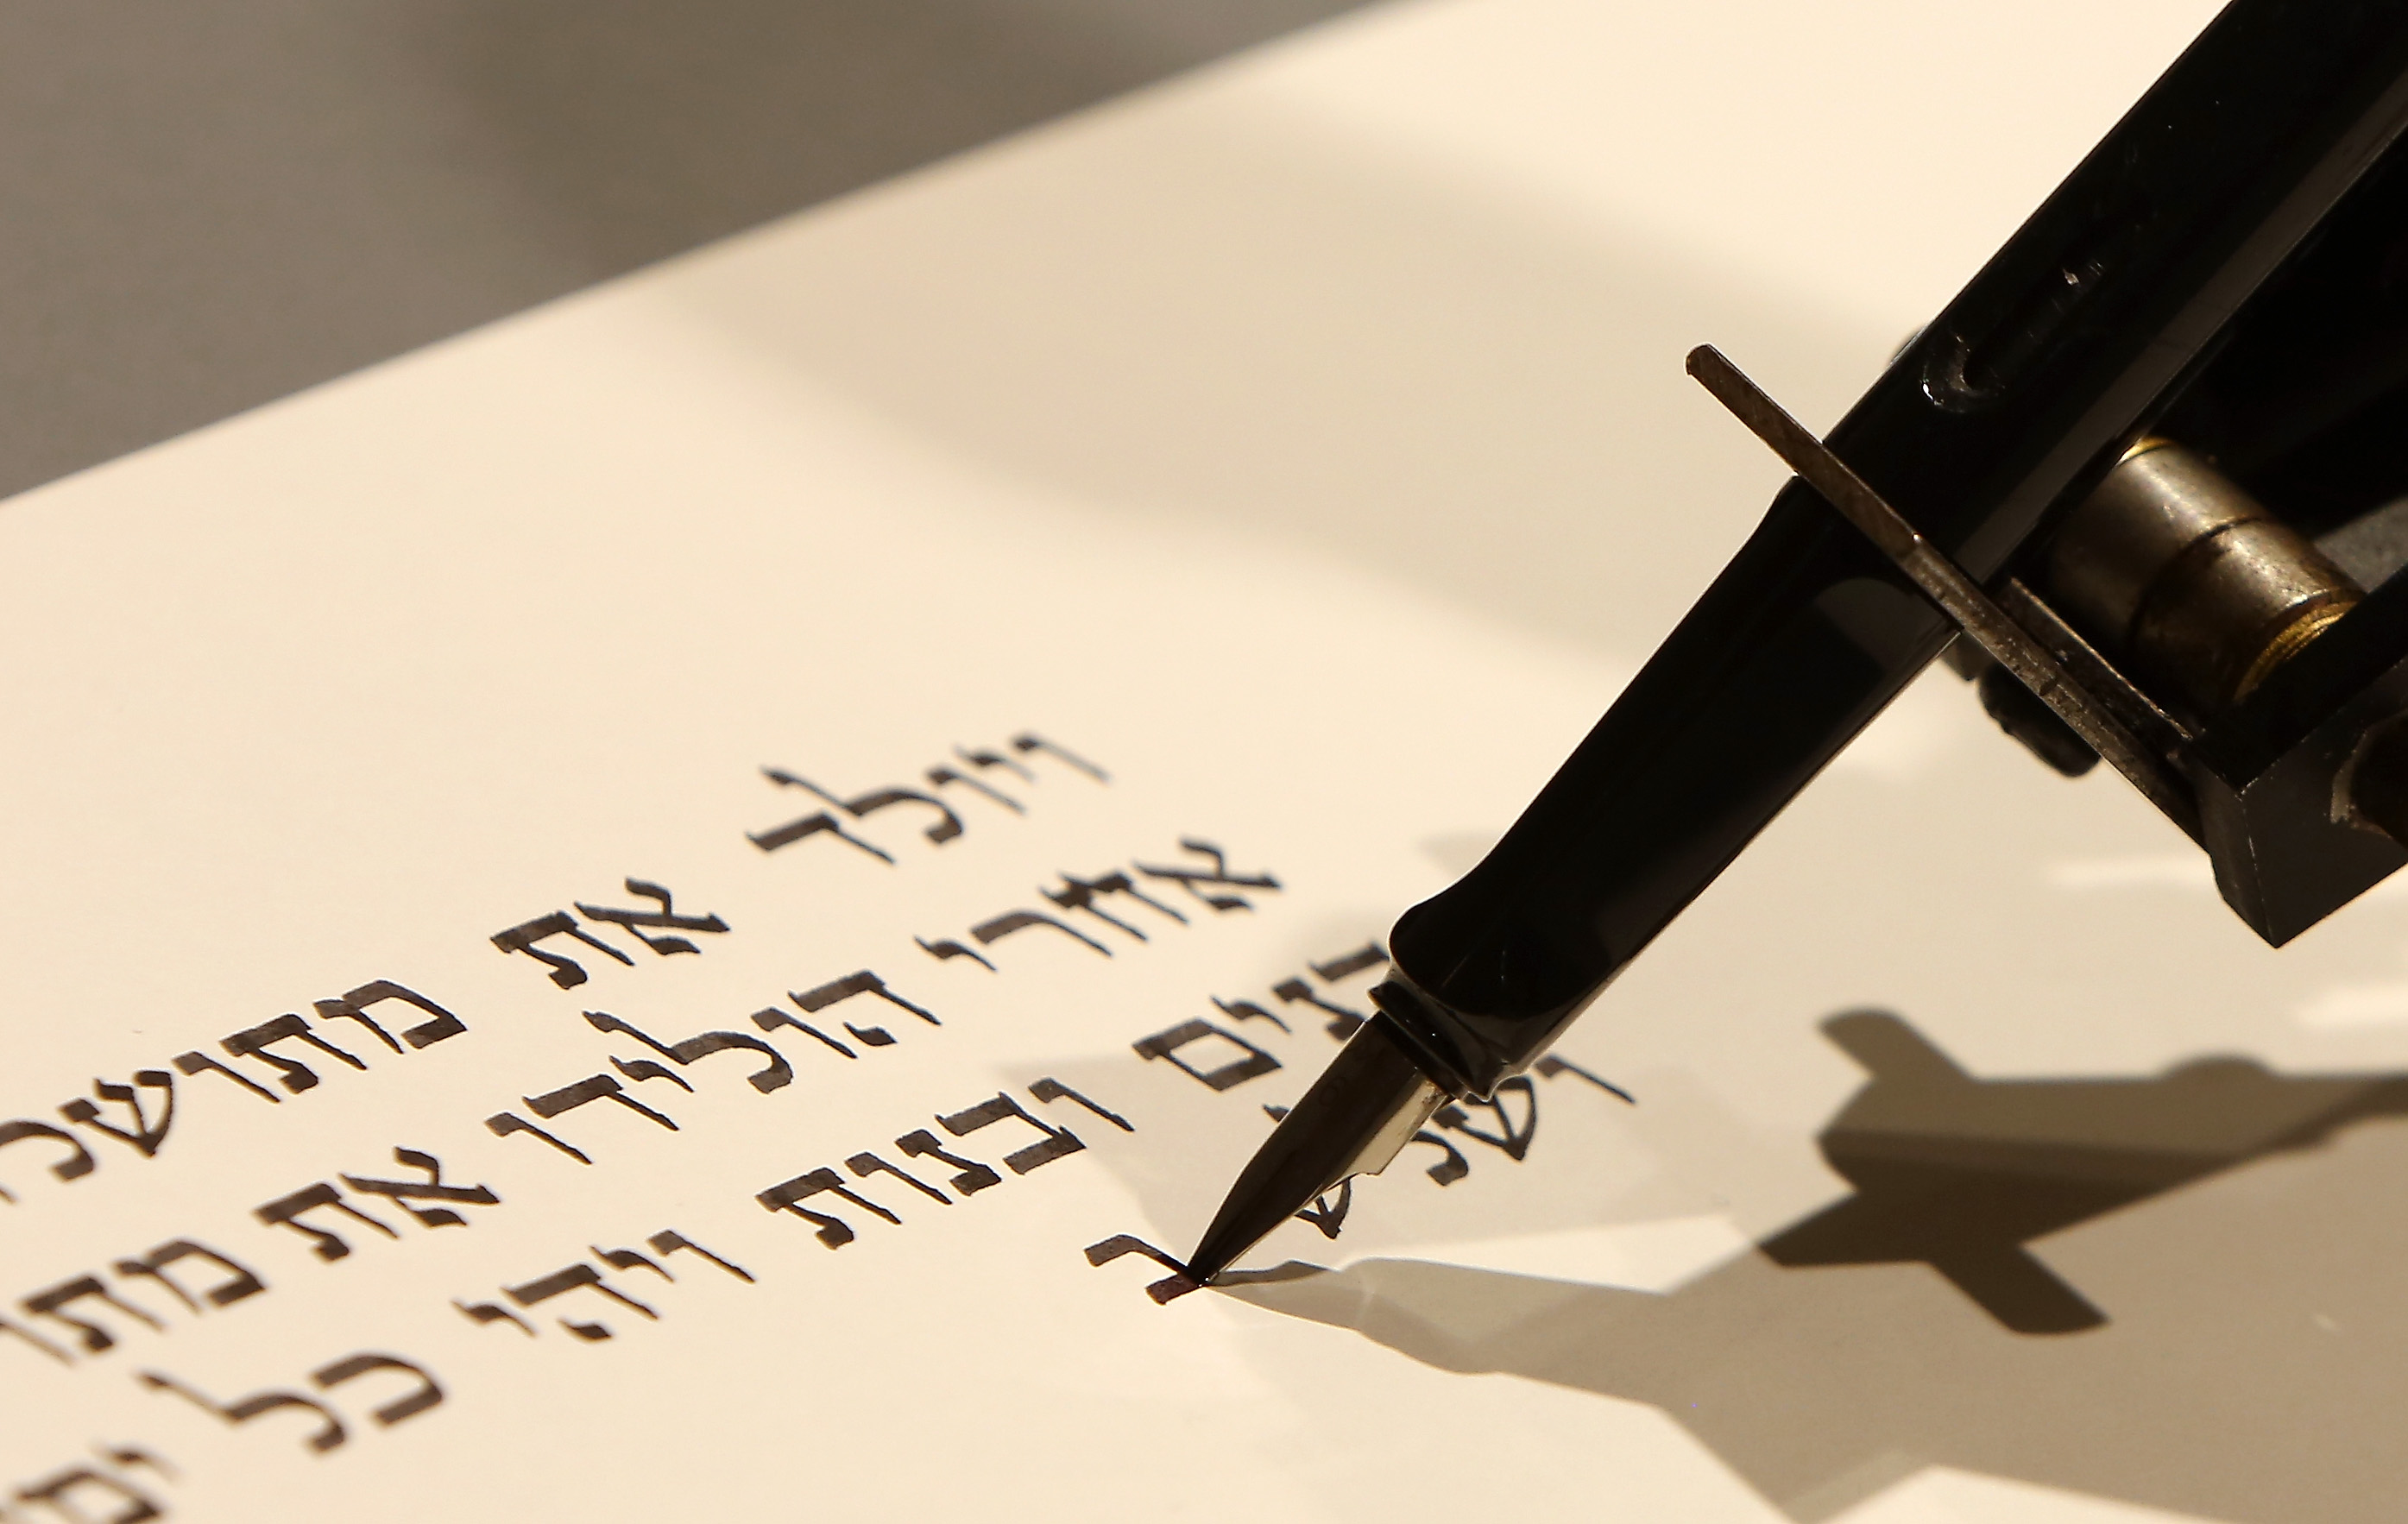 An industrial robot, an installation work called 'bios [torah]' by the artist group robotlab, begins writing a Torah on July 10, 2014 in the Jewish Museum in Berlin, Germany. (Adam Berry—Getty Images)